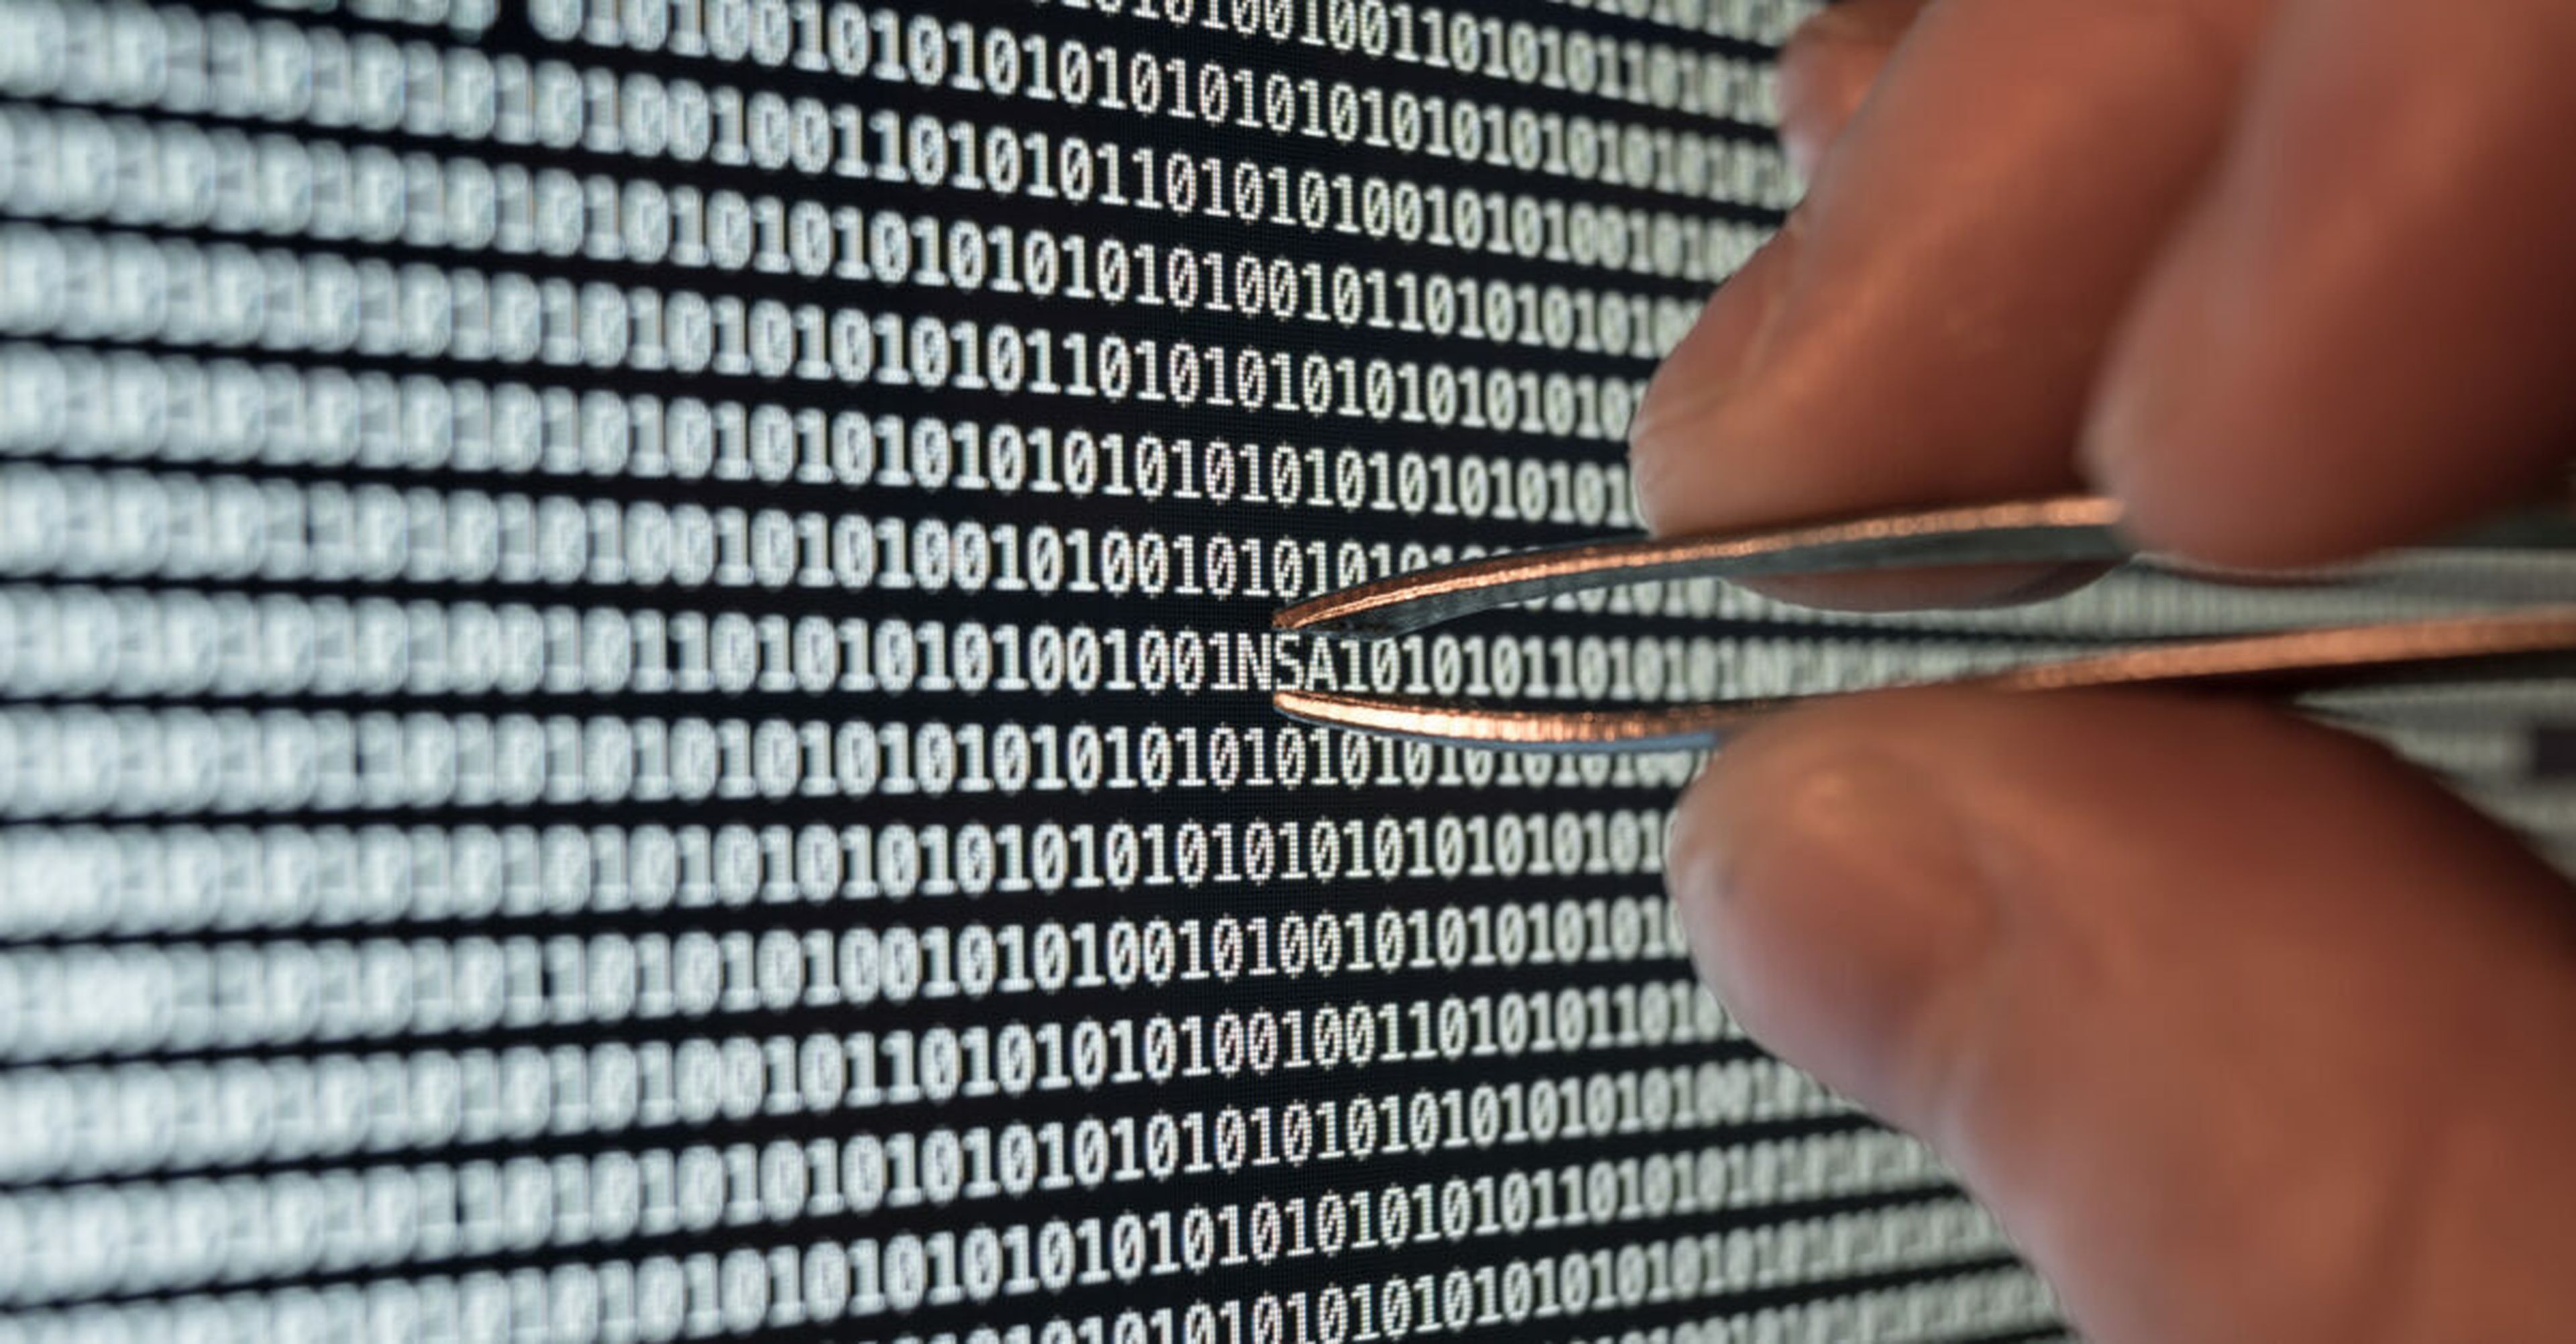 Binary code, taking out the nsa with tweezers. At the RSA conference, Rob Joyce, director of cybersecurity at the National Security Agency said says there has been “enormous” amount of hacking in the Russia-Ukraine war. (Image Credit: MysteryShot via Getty)